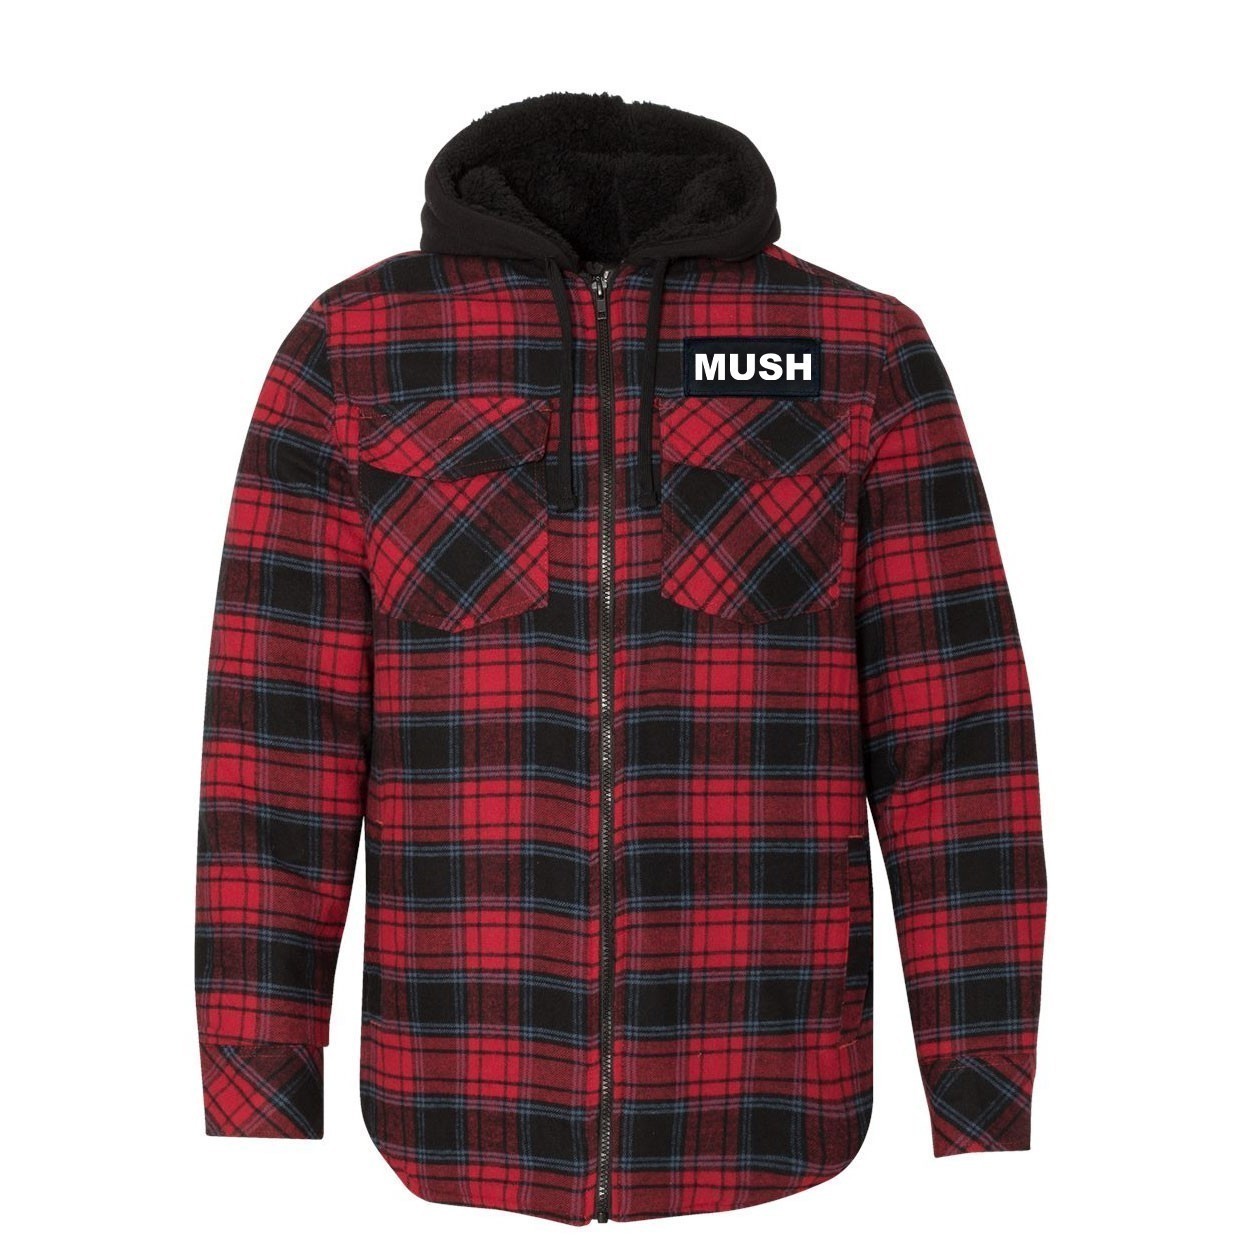 Mush Brand Logo Classic Unisex Full Zip Woven Patch Hooded Flannel Jacket Red/Black Buffalo